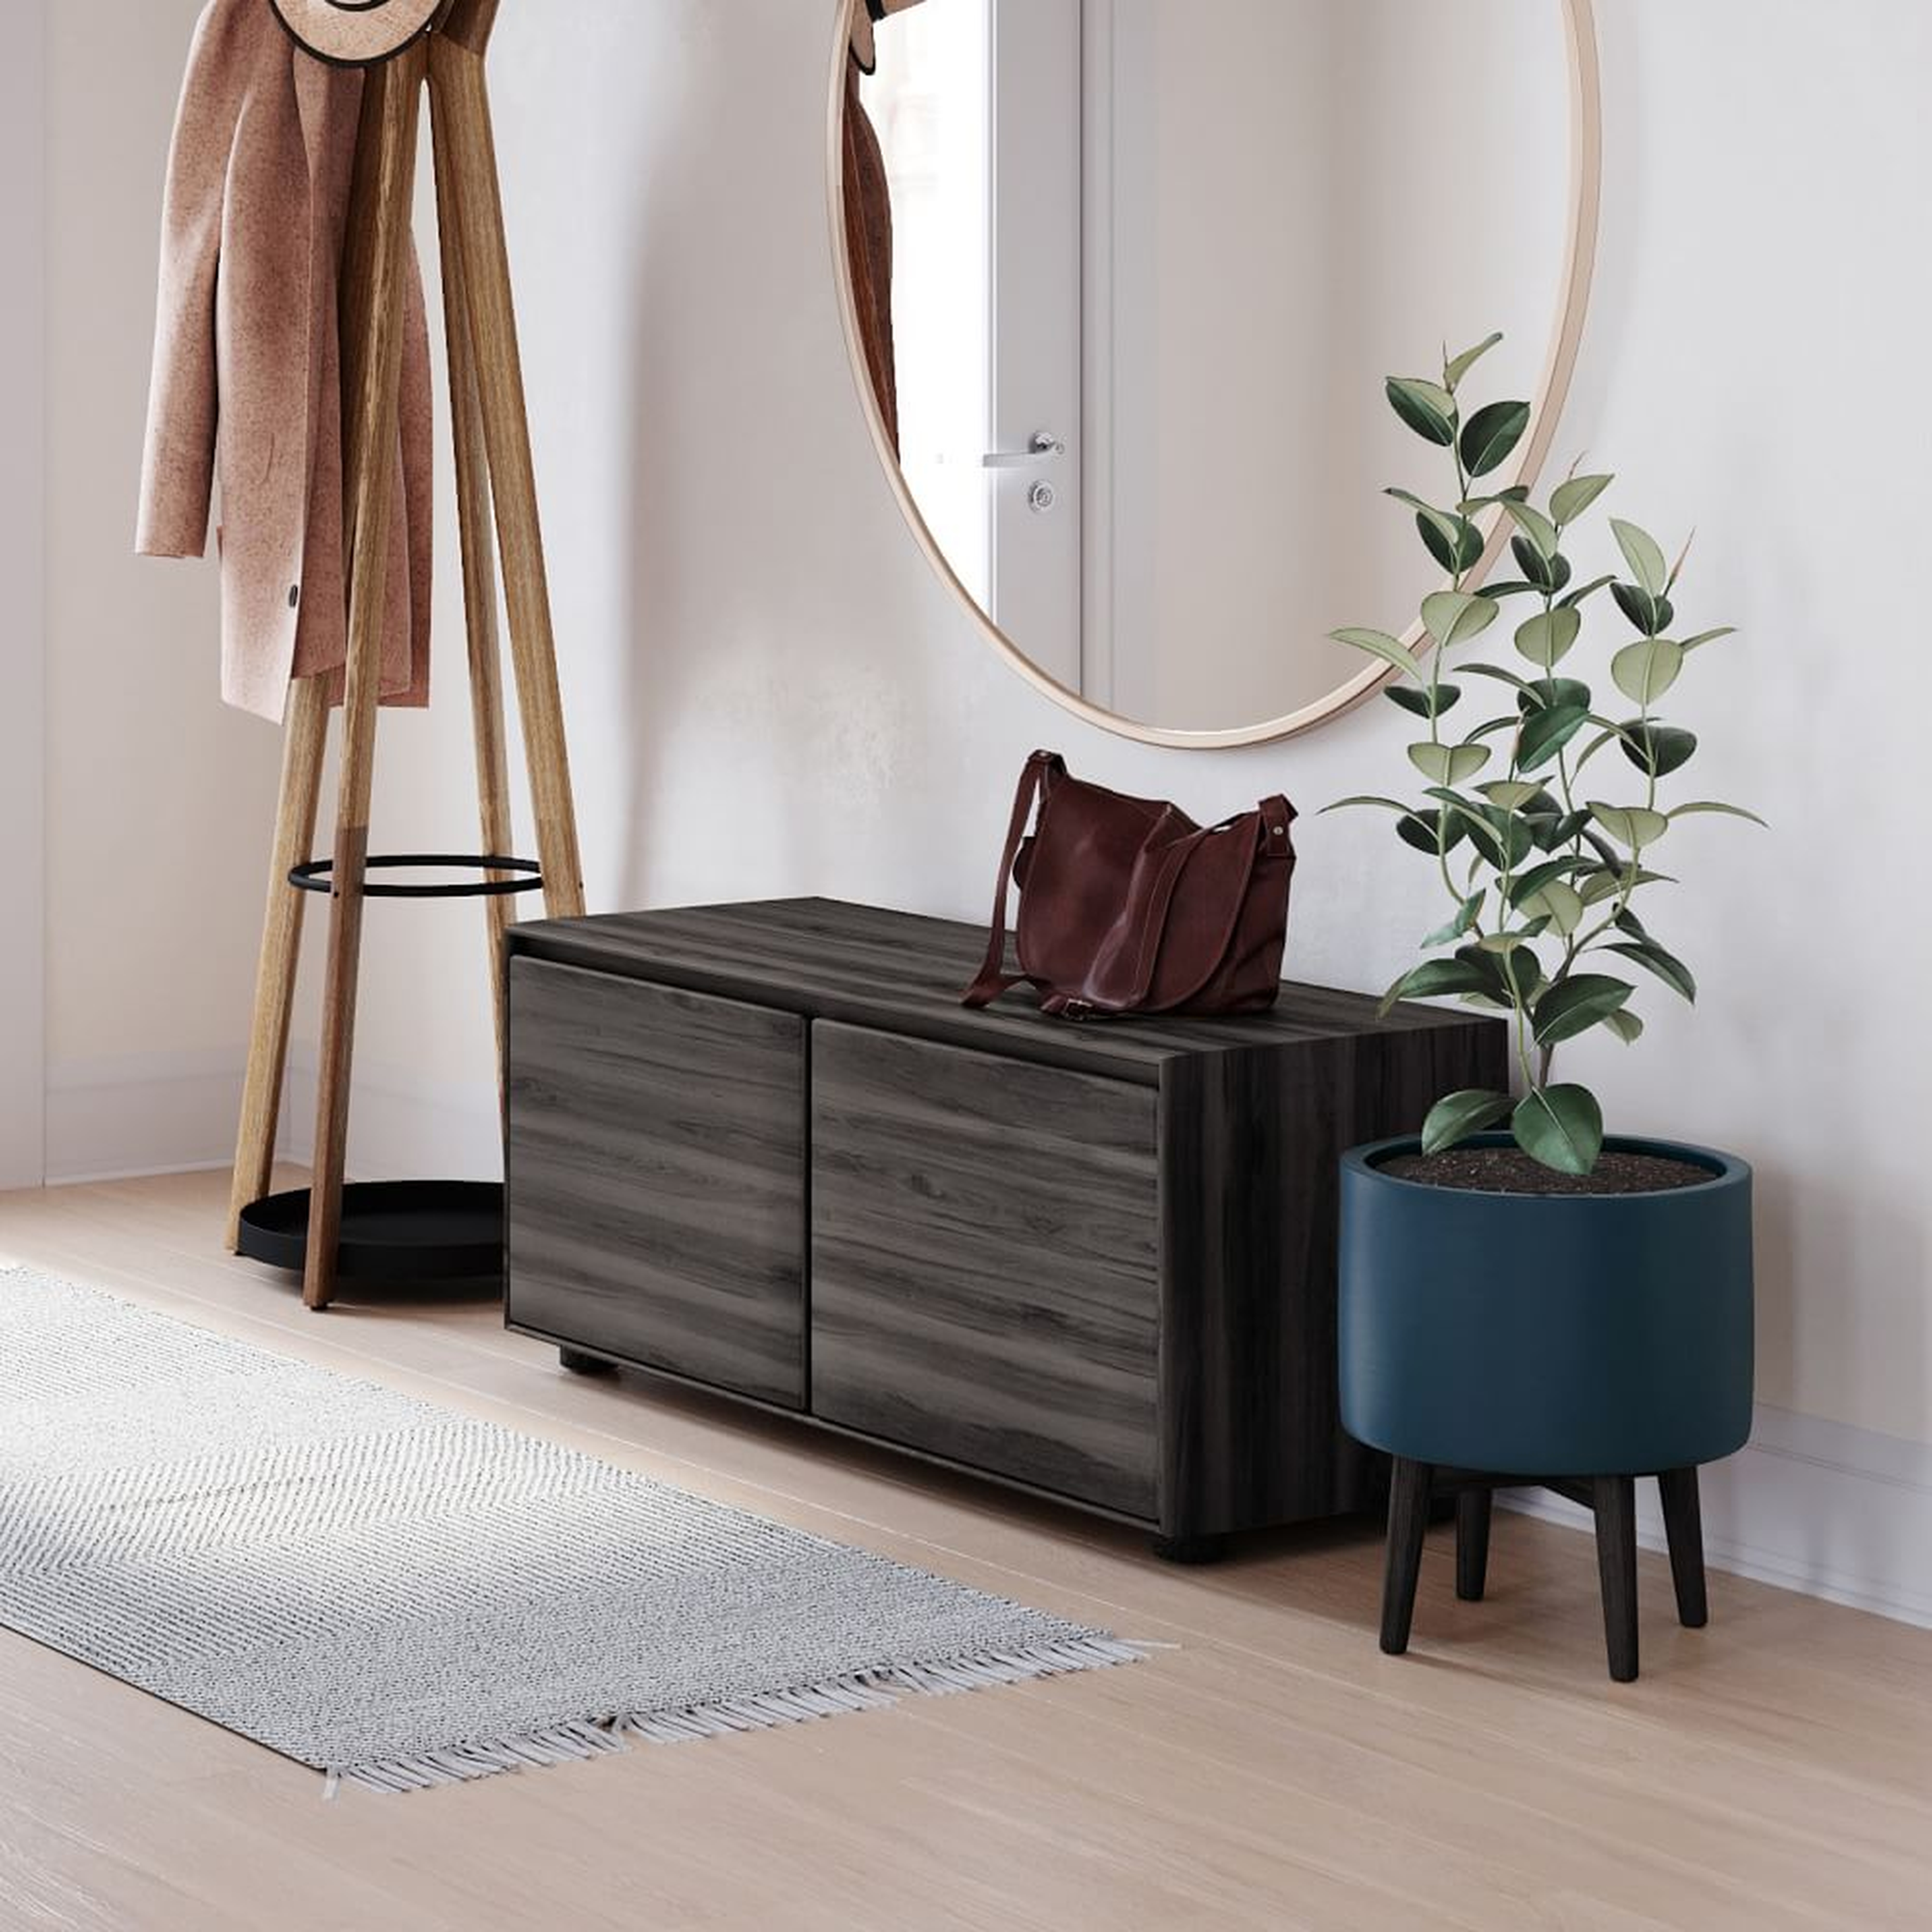 We Anton Solid Wood Collection Black Entryway Bench Mango - West Elm